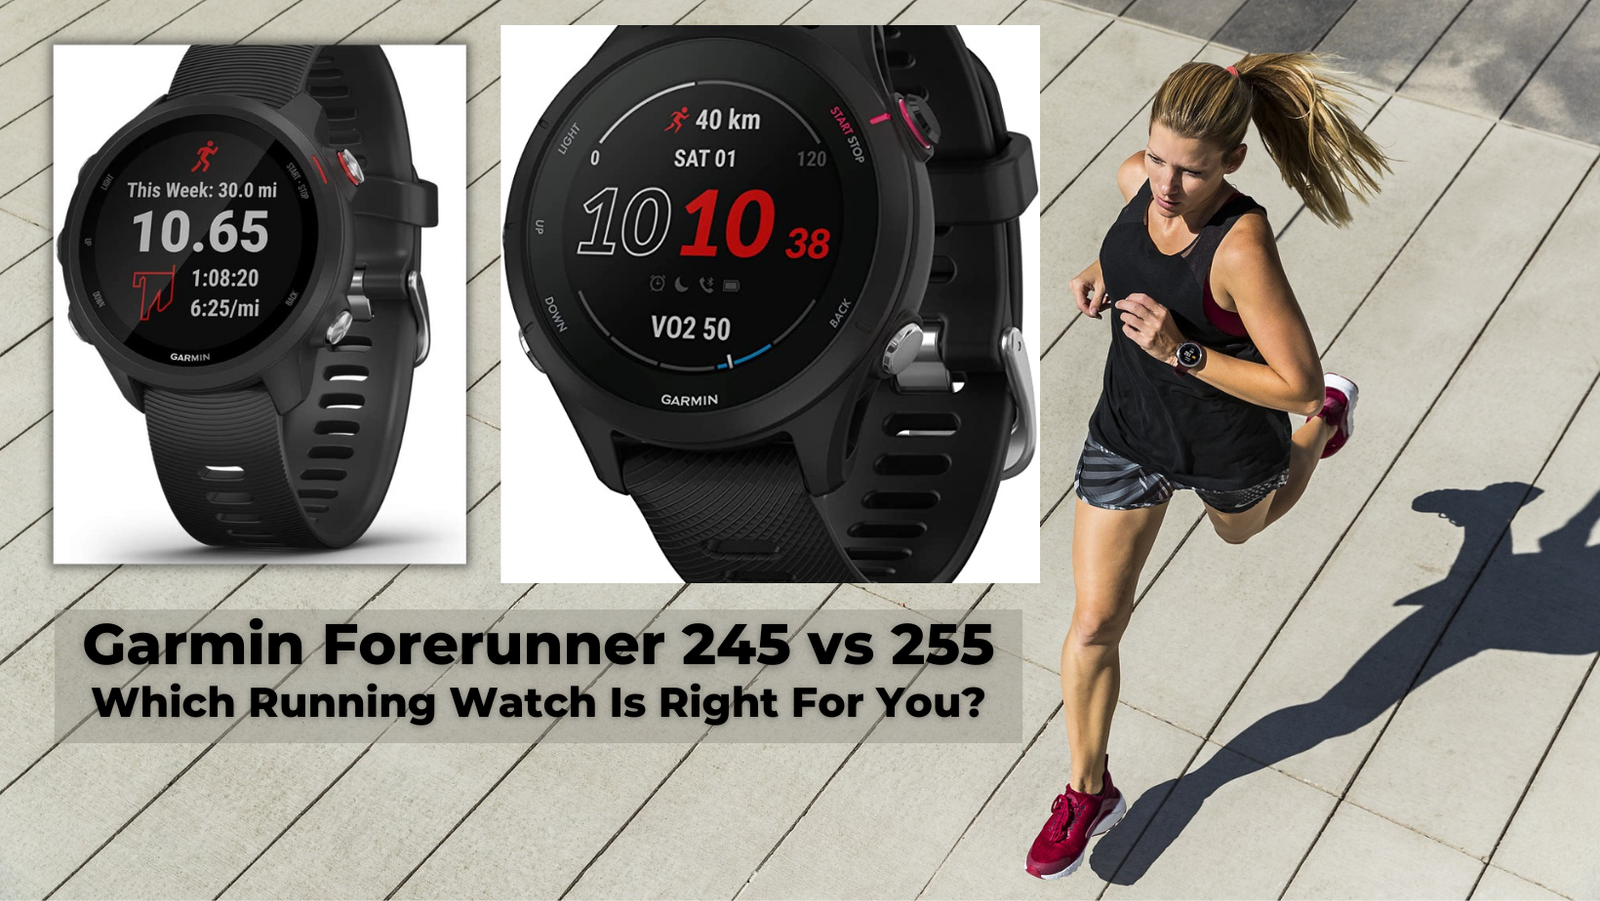 Garmin Forerunner 245 vs 255: Which Running Watch Is Right For You?